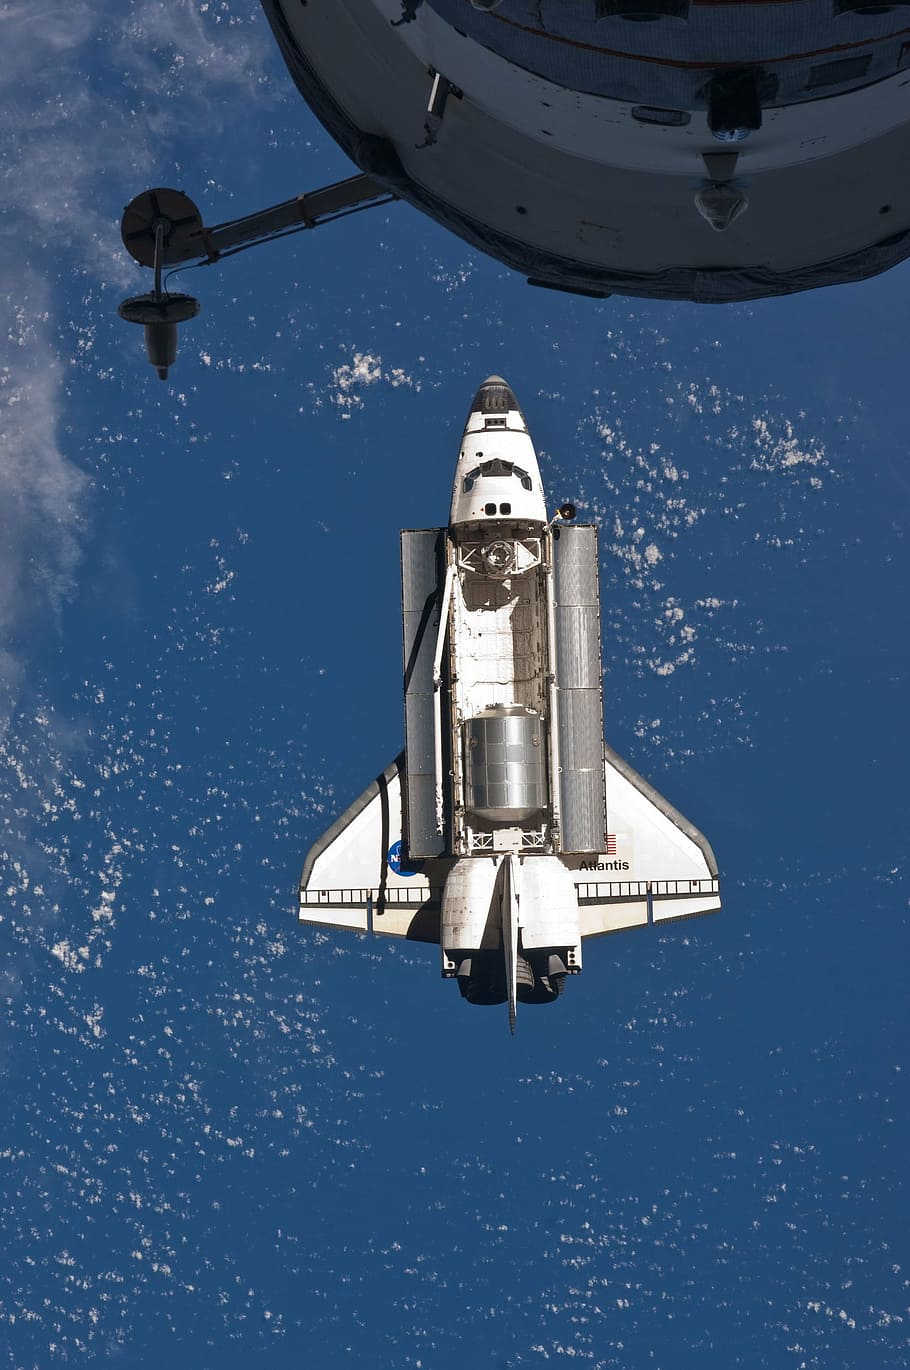 white space shuttle in outerspace, atlantis, docking, preparation